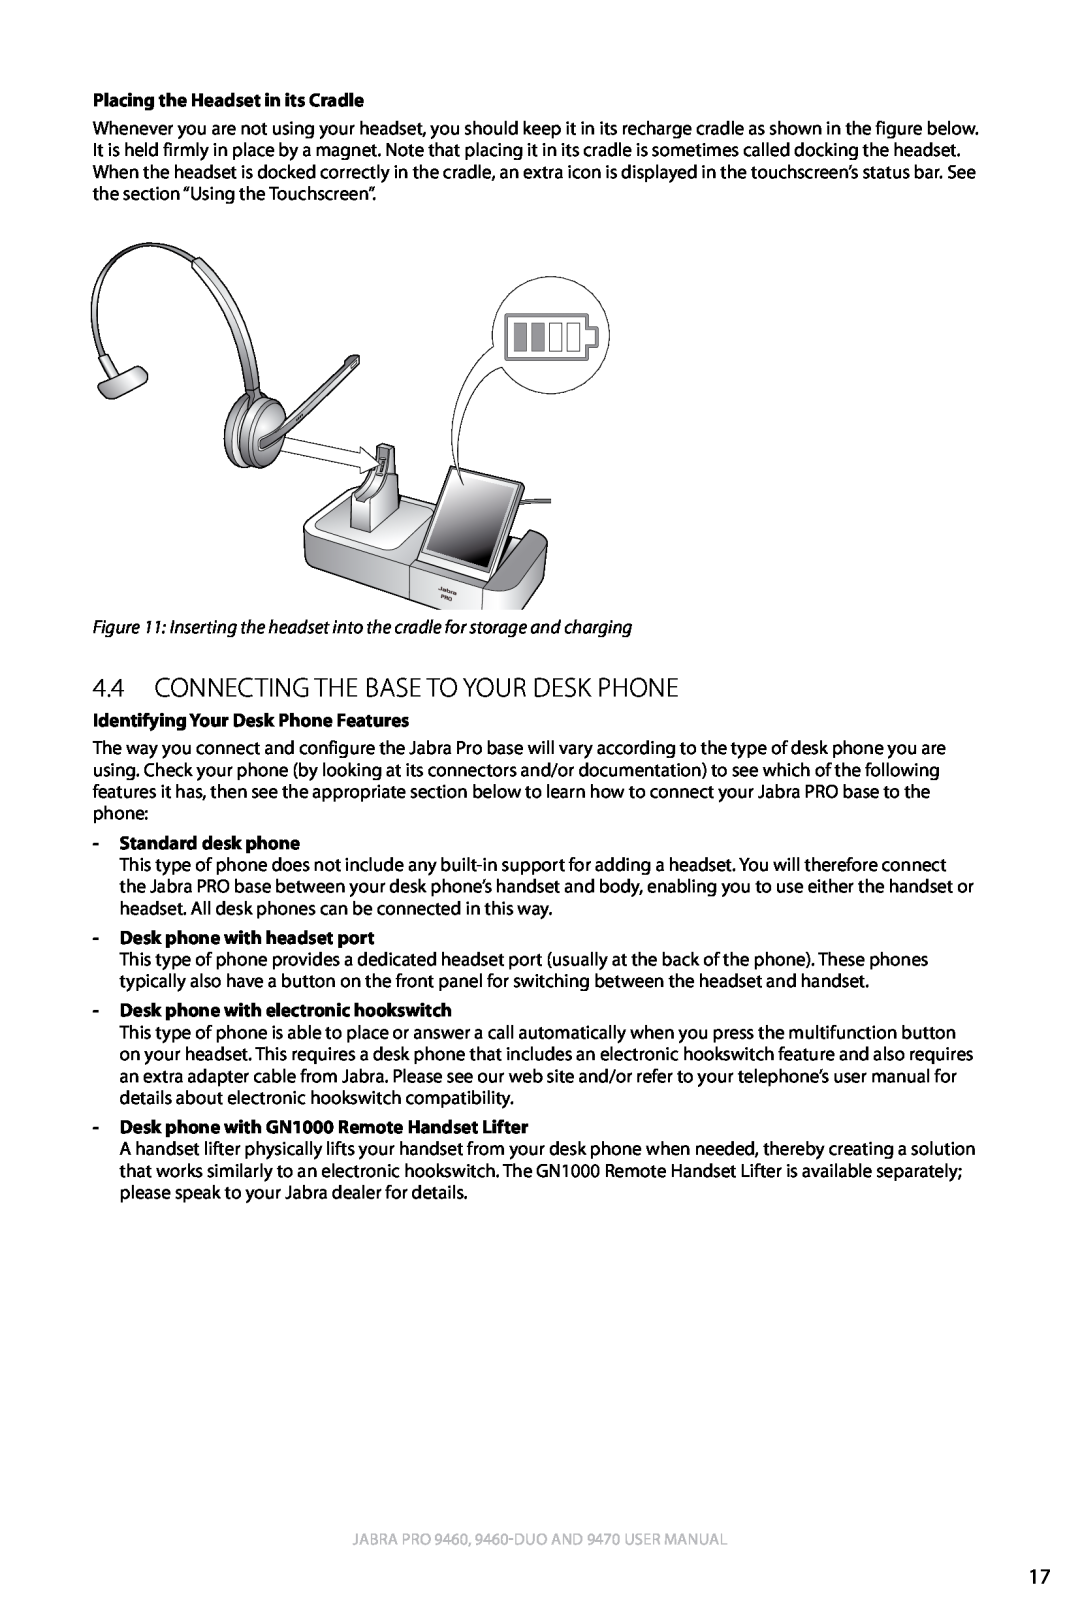 Lennox Hearth 9470 user manual 4.4Connecting the Base to Your Desk Phone, english, Placing the Headset in its Cradle 